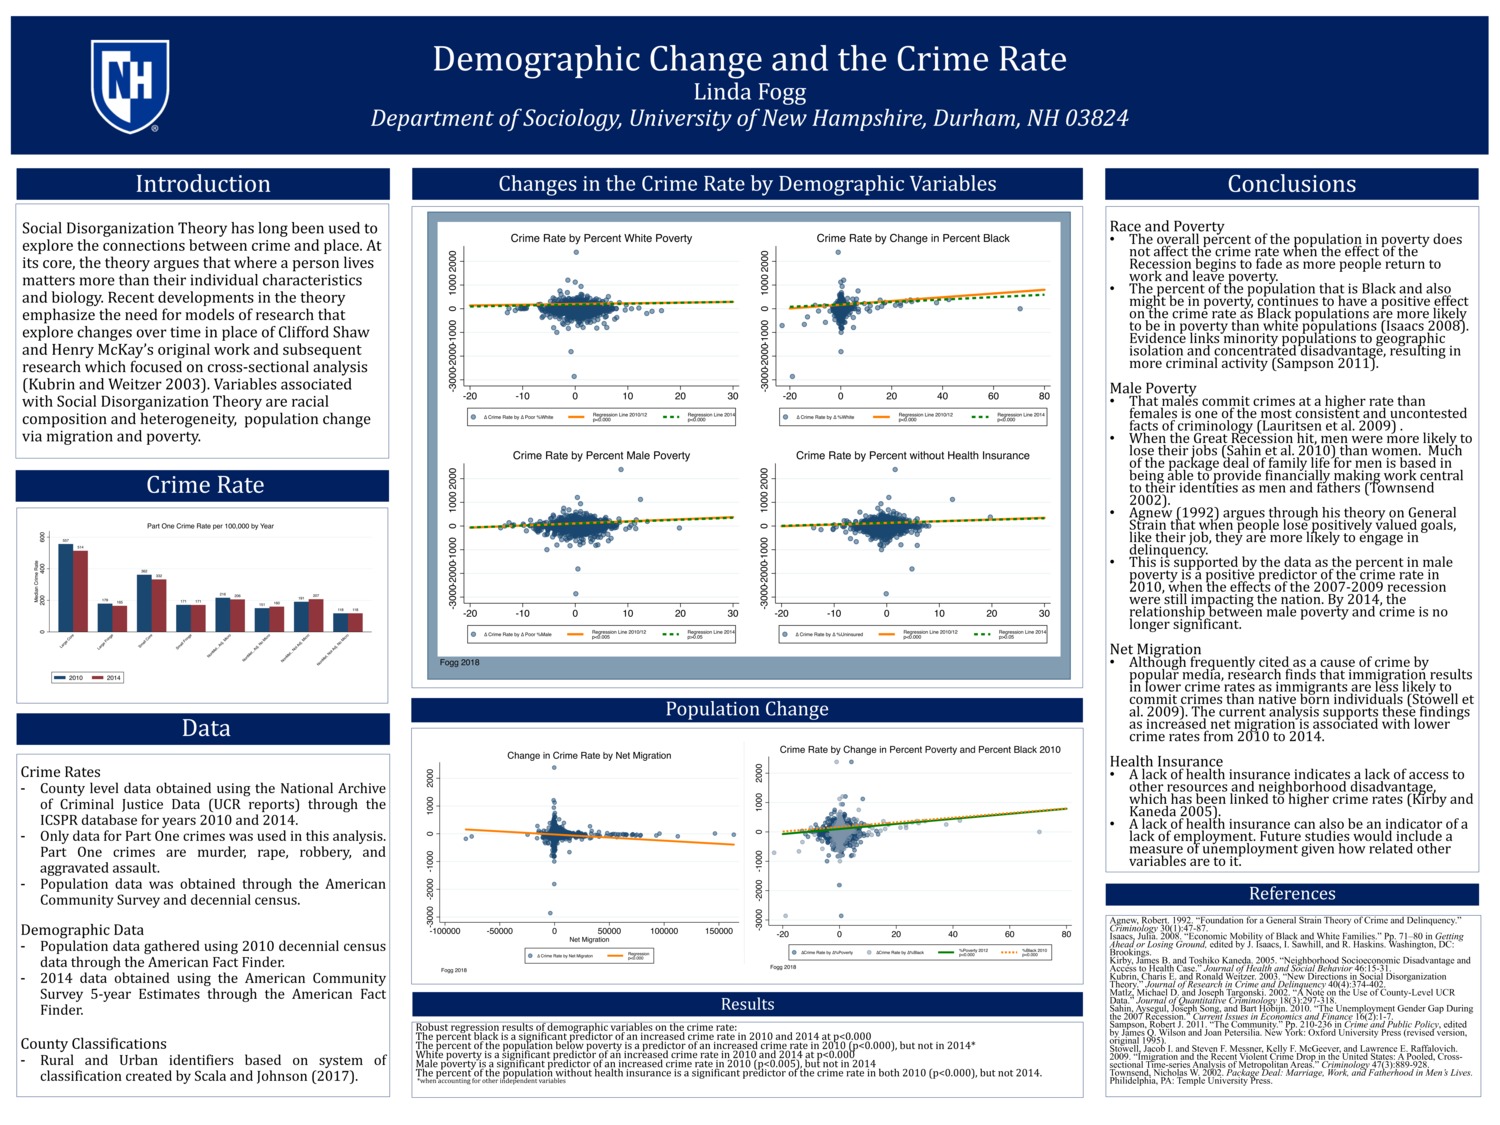 Demographic Change And The Crime Rate by lmf1023